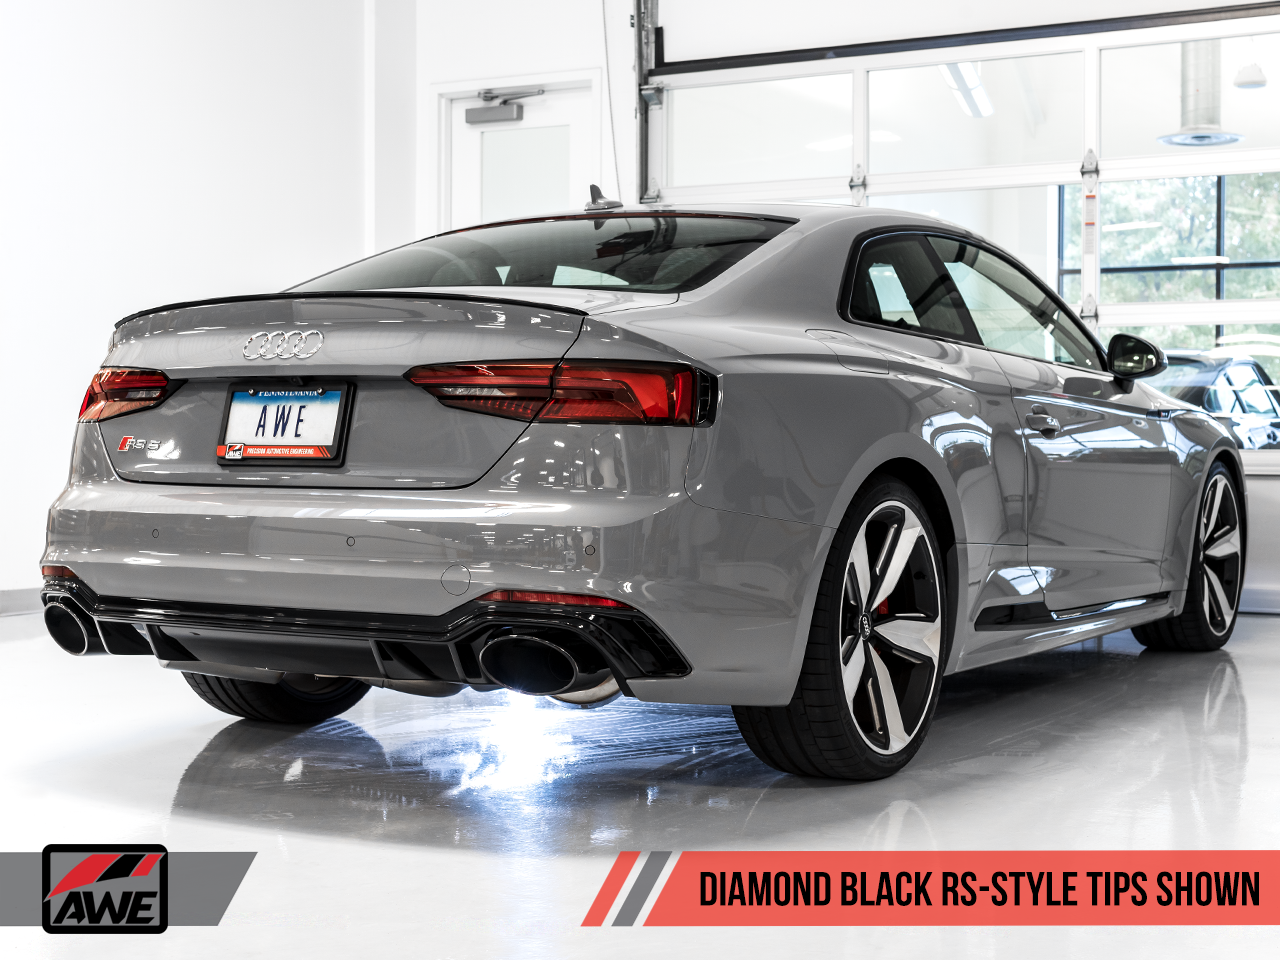 AWE Tuning Track Edition Exhaust for Audi B9 RS 5 - Resonated for Performance Catalysts - Diamond Black RS-style Tips